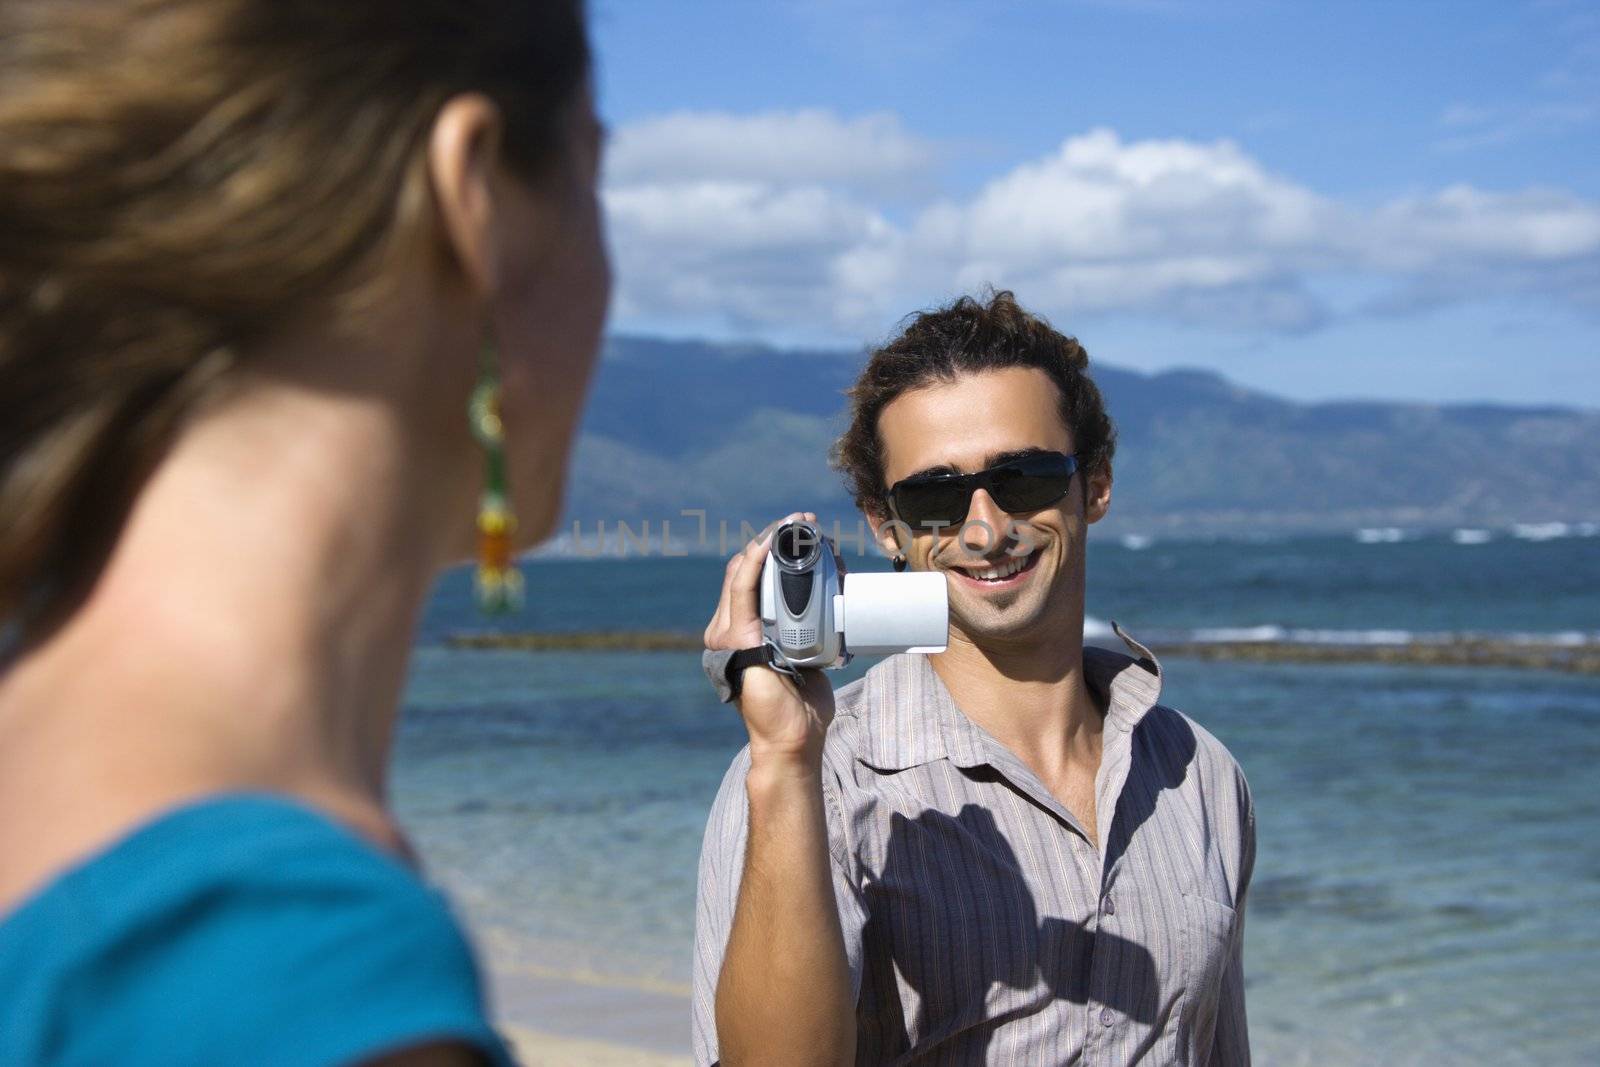 Mid-adult Caucasian man on beach pointing video camera at woman.